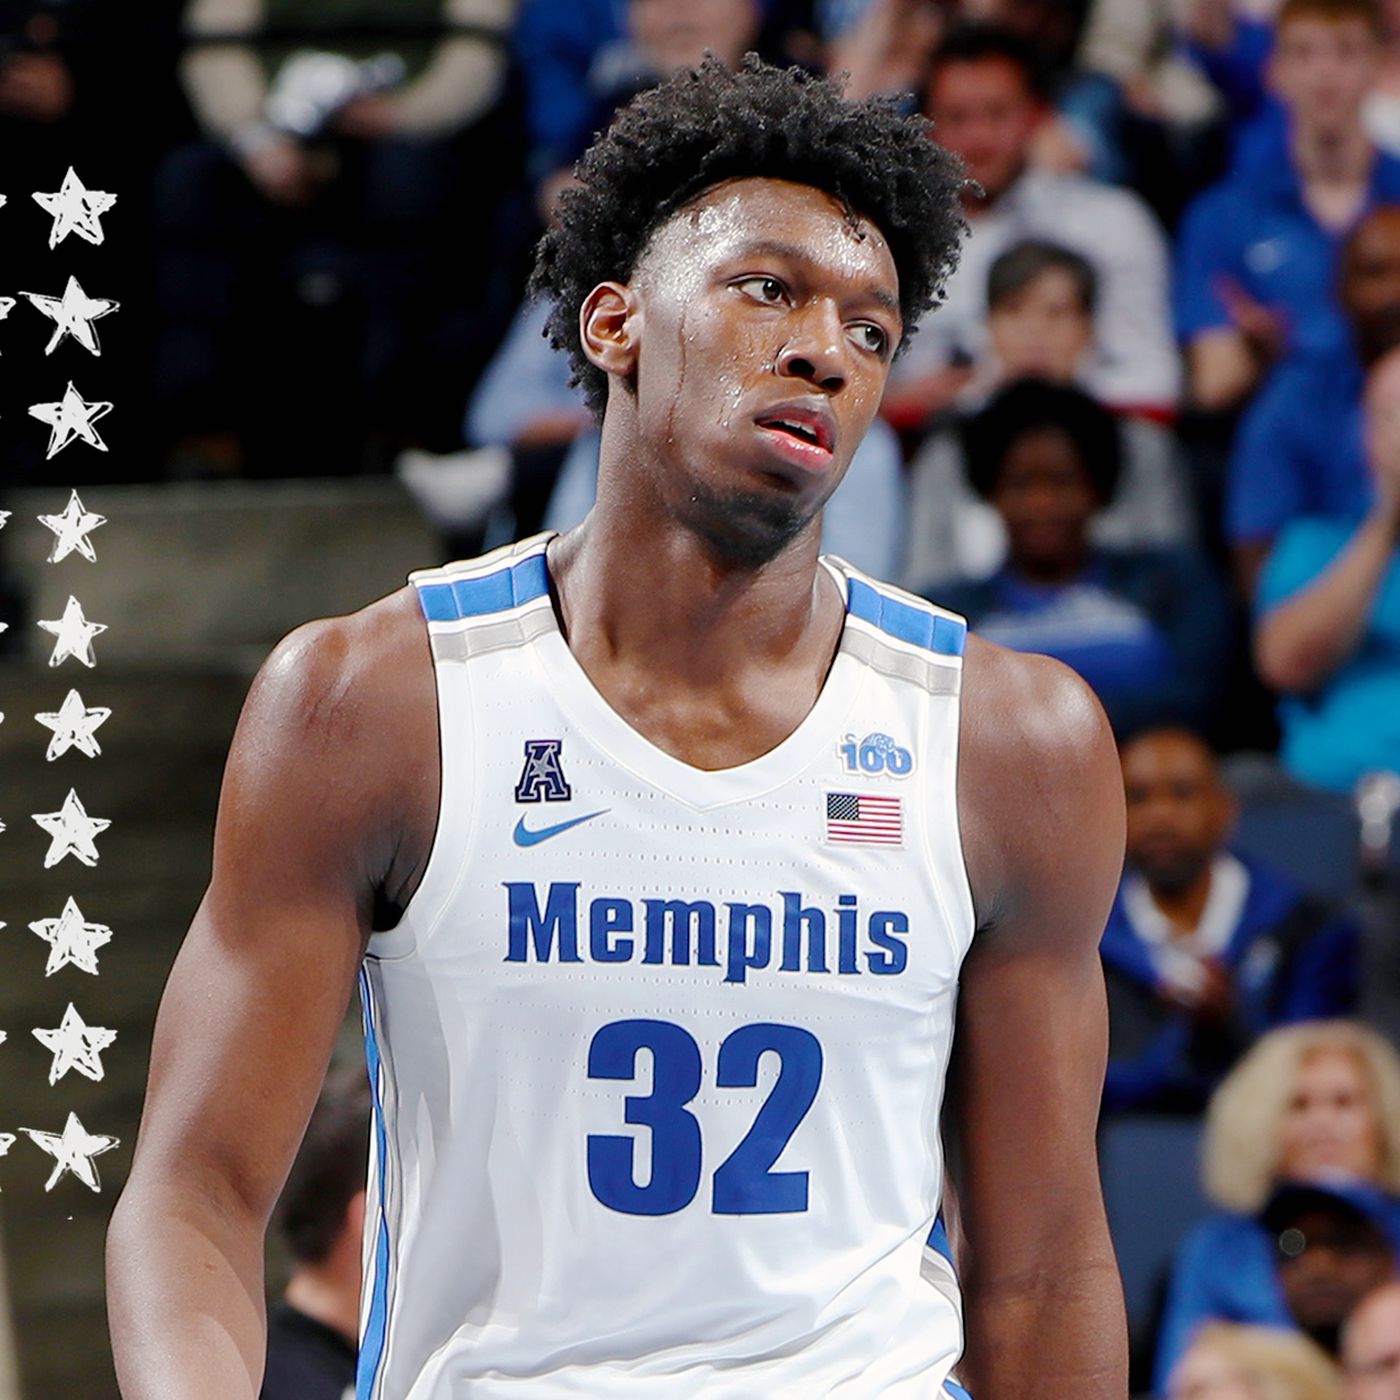 James Wisemans departure from college and NCAA eligibility